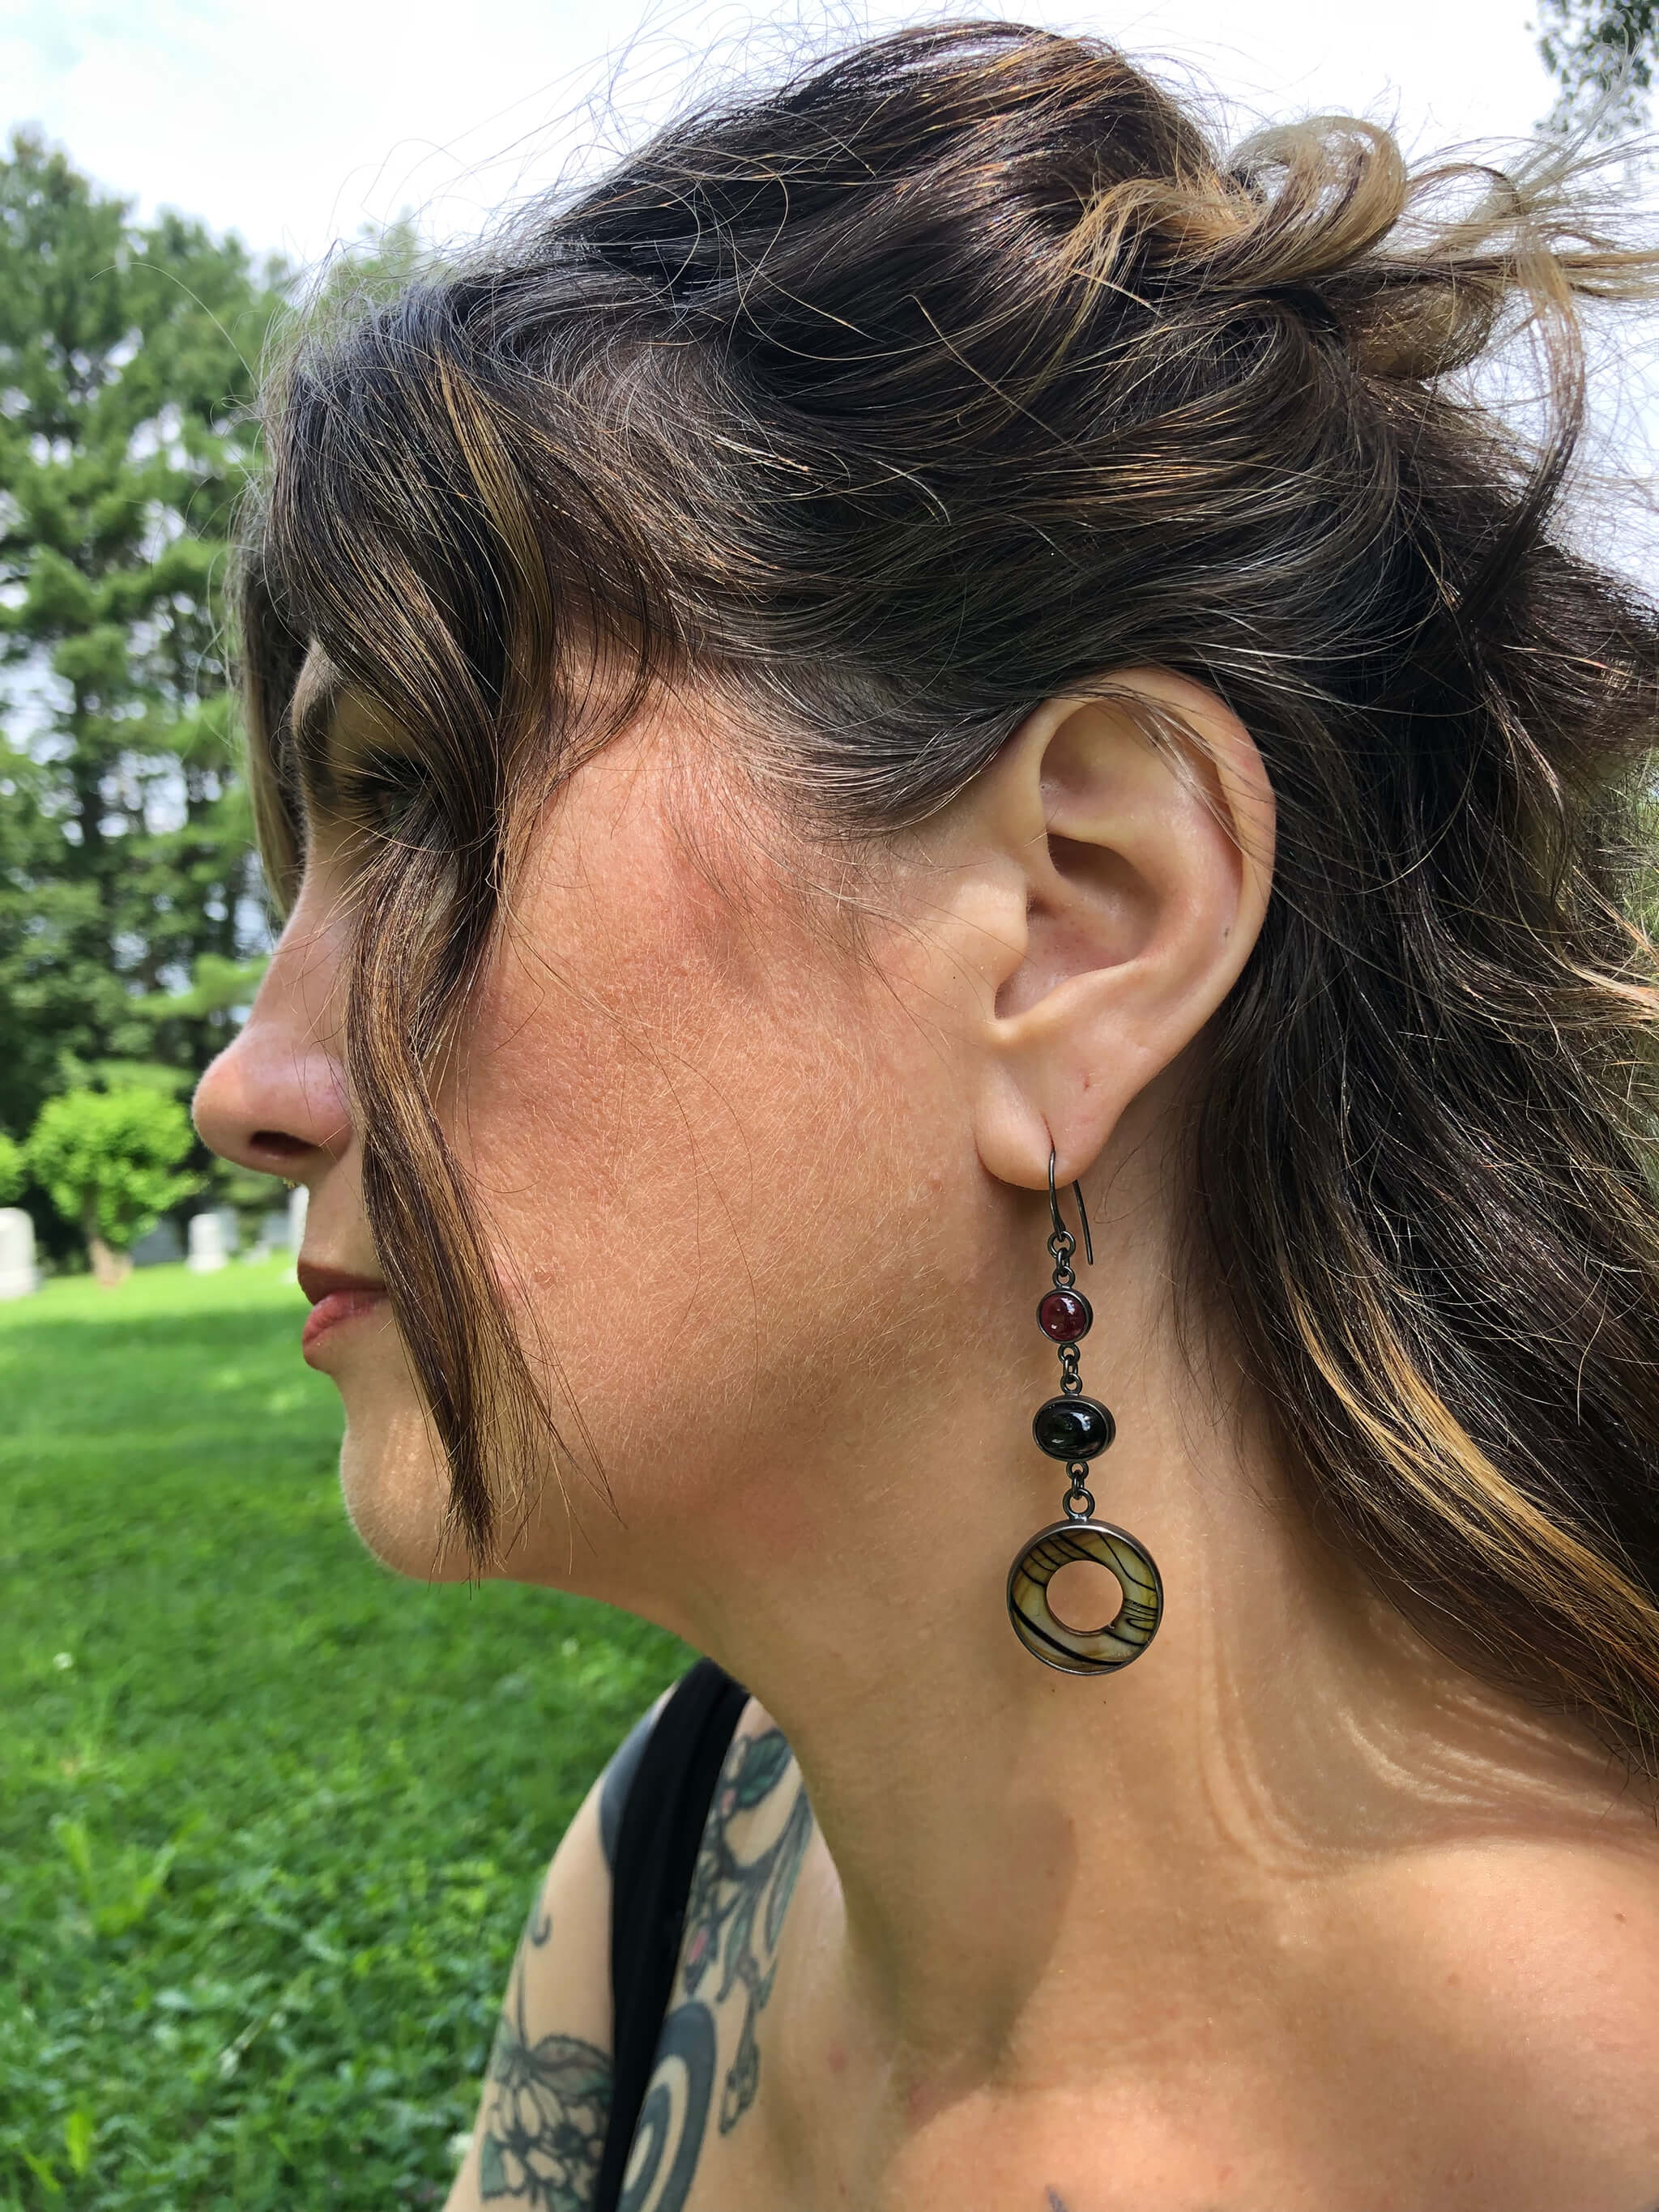 Garnet, Black Star Diopside + Mother of Pearl Dangle Earrings. Set in oxidized sterling silver. "Betwixt + Between" collection by Alex Lozier Jewelry + Salicrow.